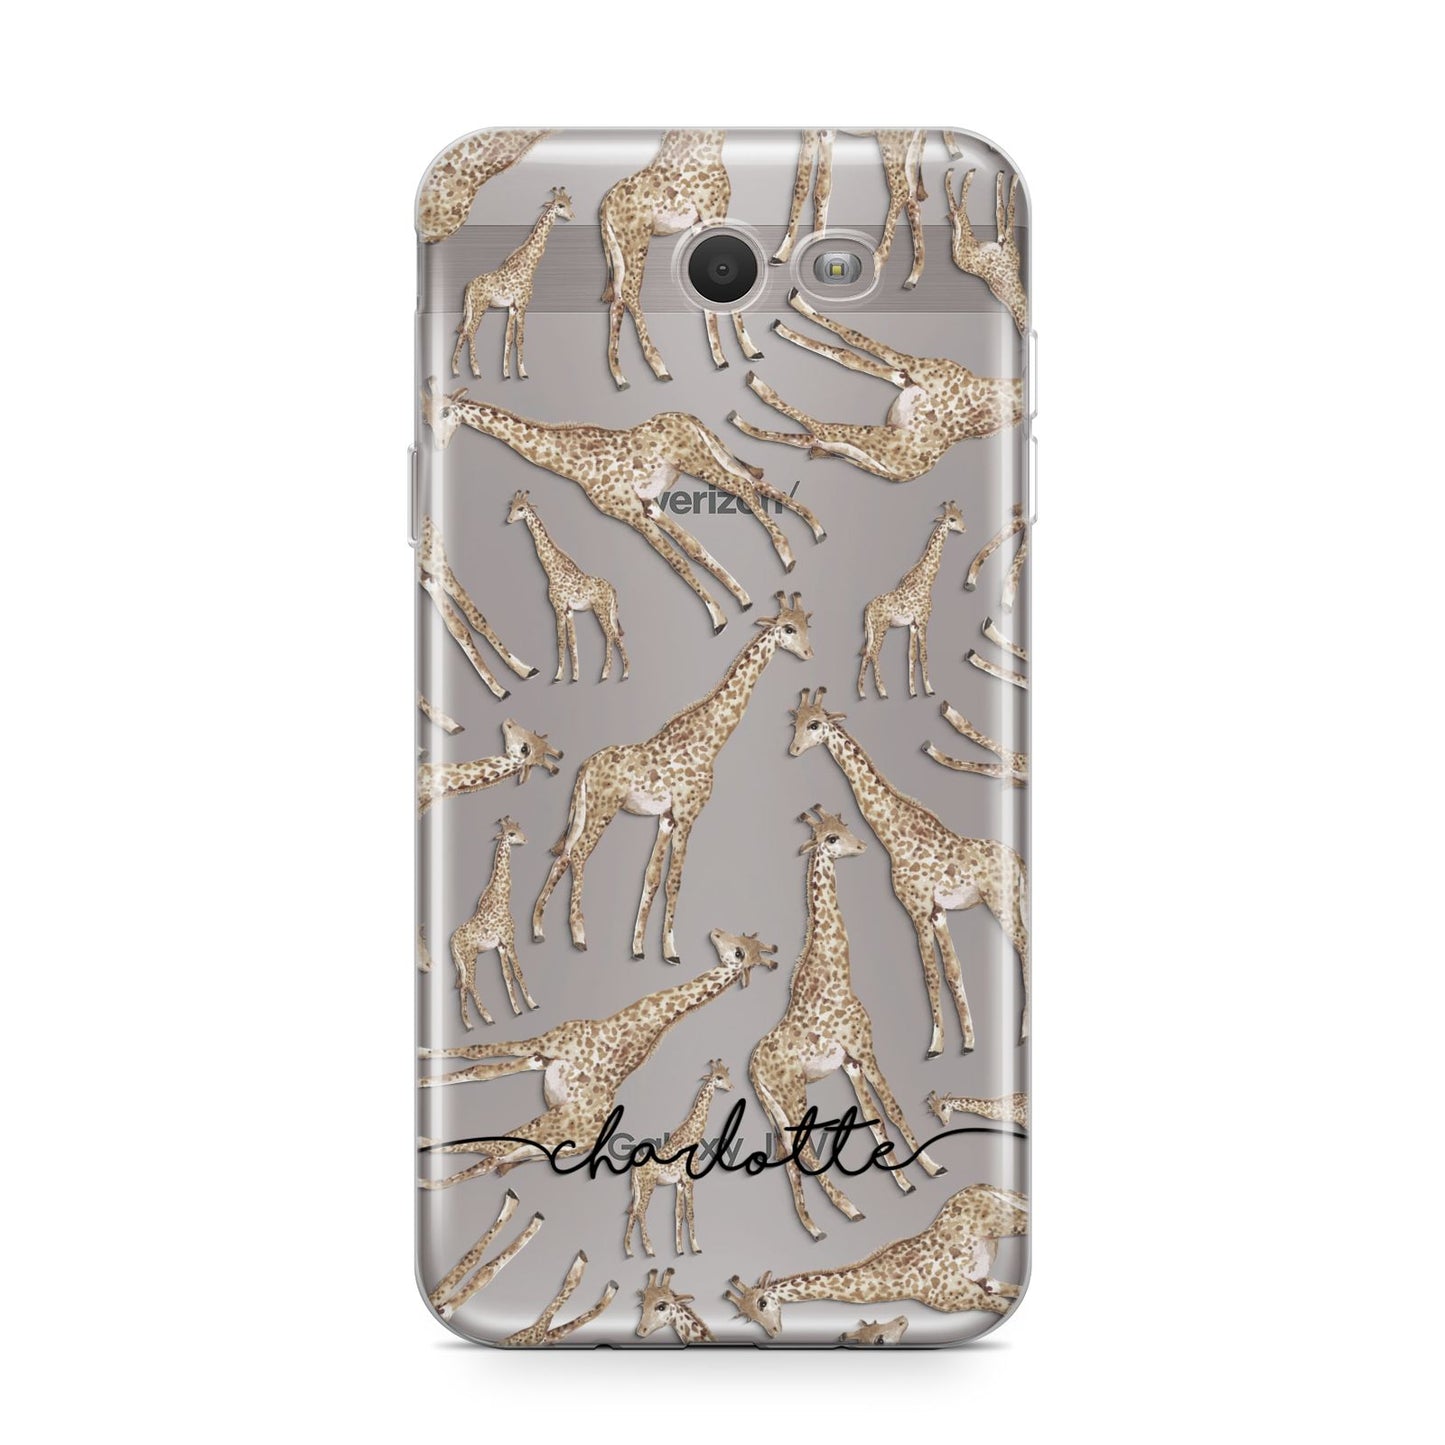 Personalised Giraffes with Name Samsung Galaxy J7 2017 Case